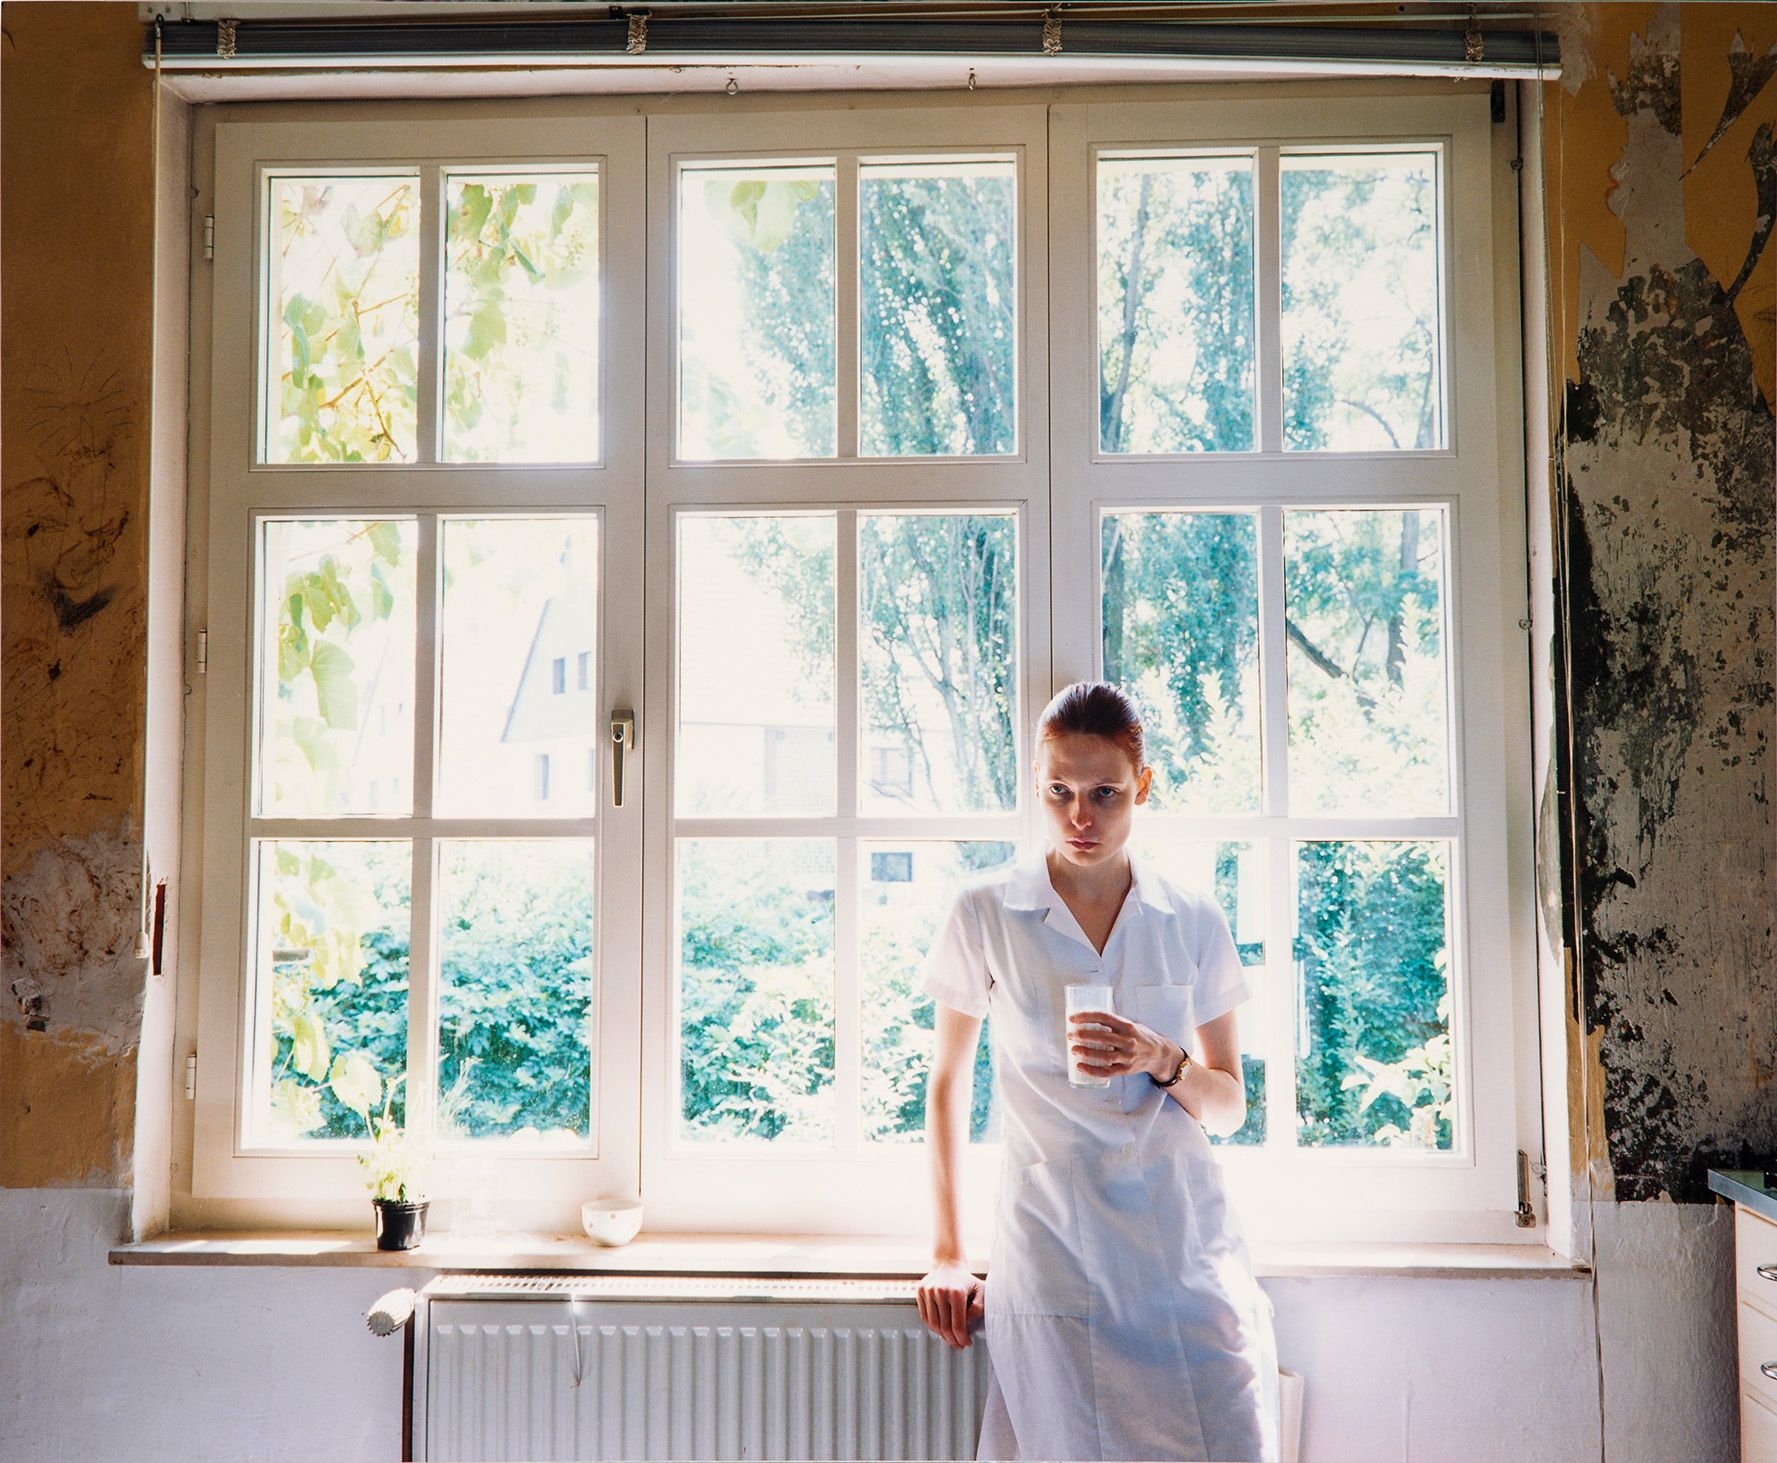 Untitled (Woman in front of window) - Aino Kannisto